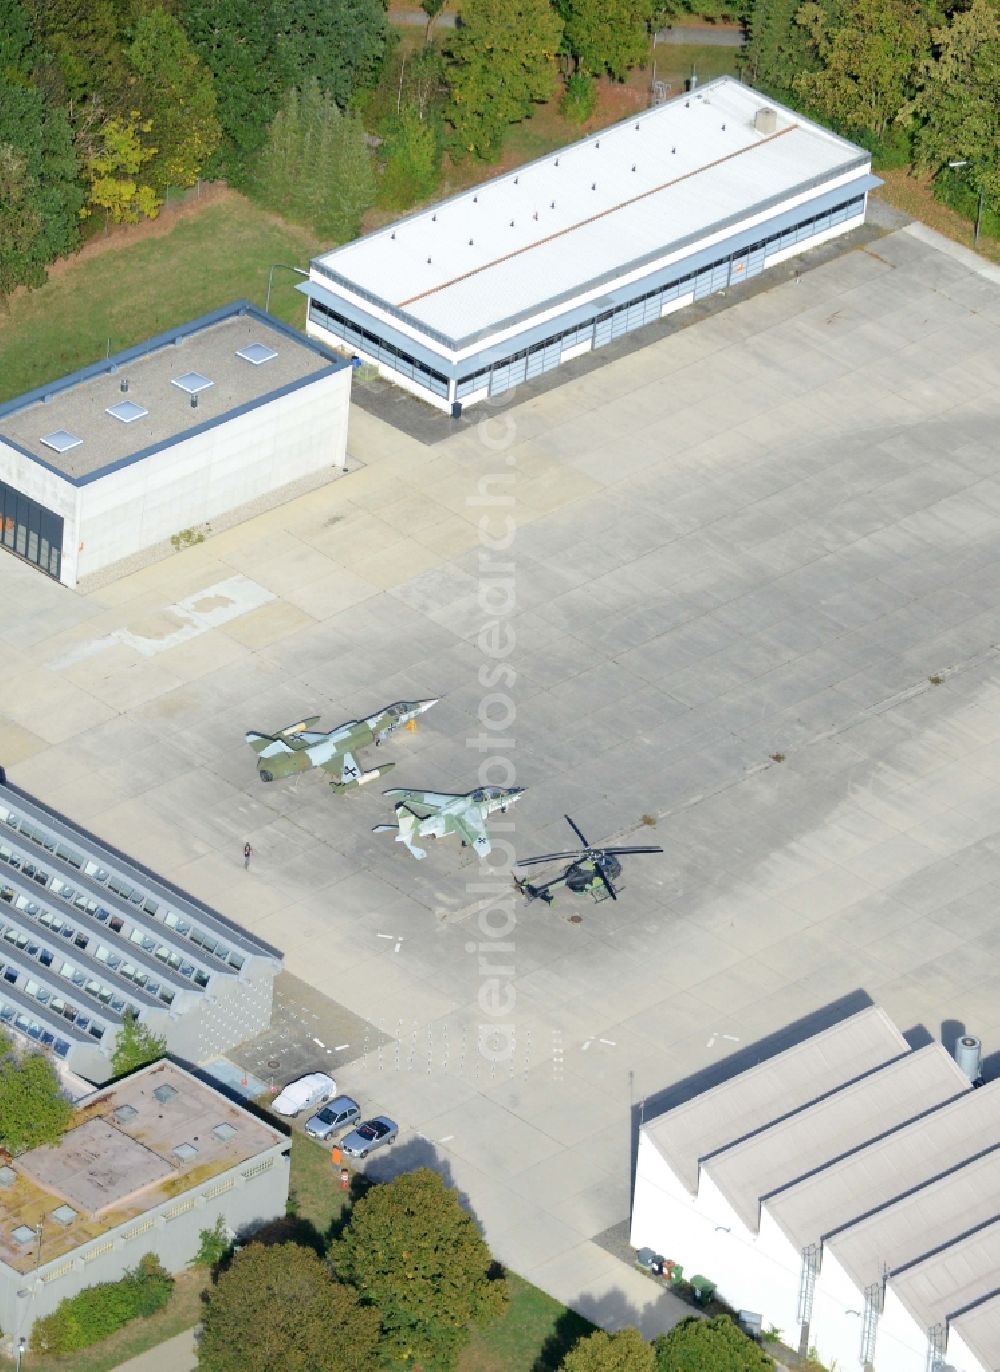 Unterhaching from above - Military airplanes and helicopter on site of the University of the Bundeswehr Munich in Unterhaching in the state of Bavaria. The two jets and the helicopter are located in front of hangars and outbuildings